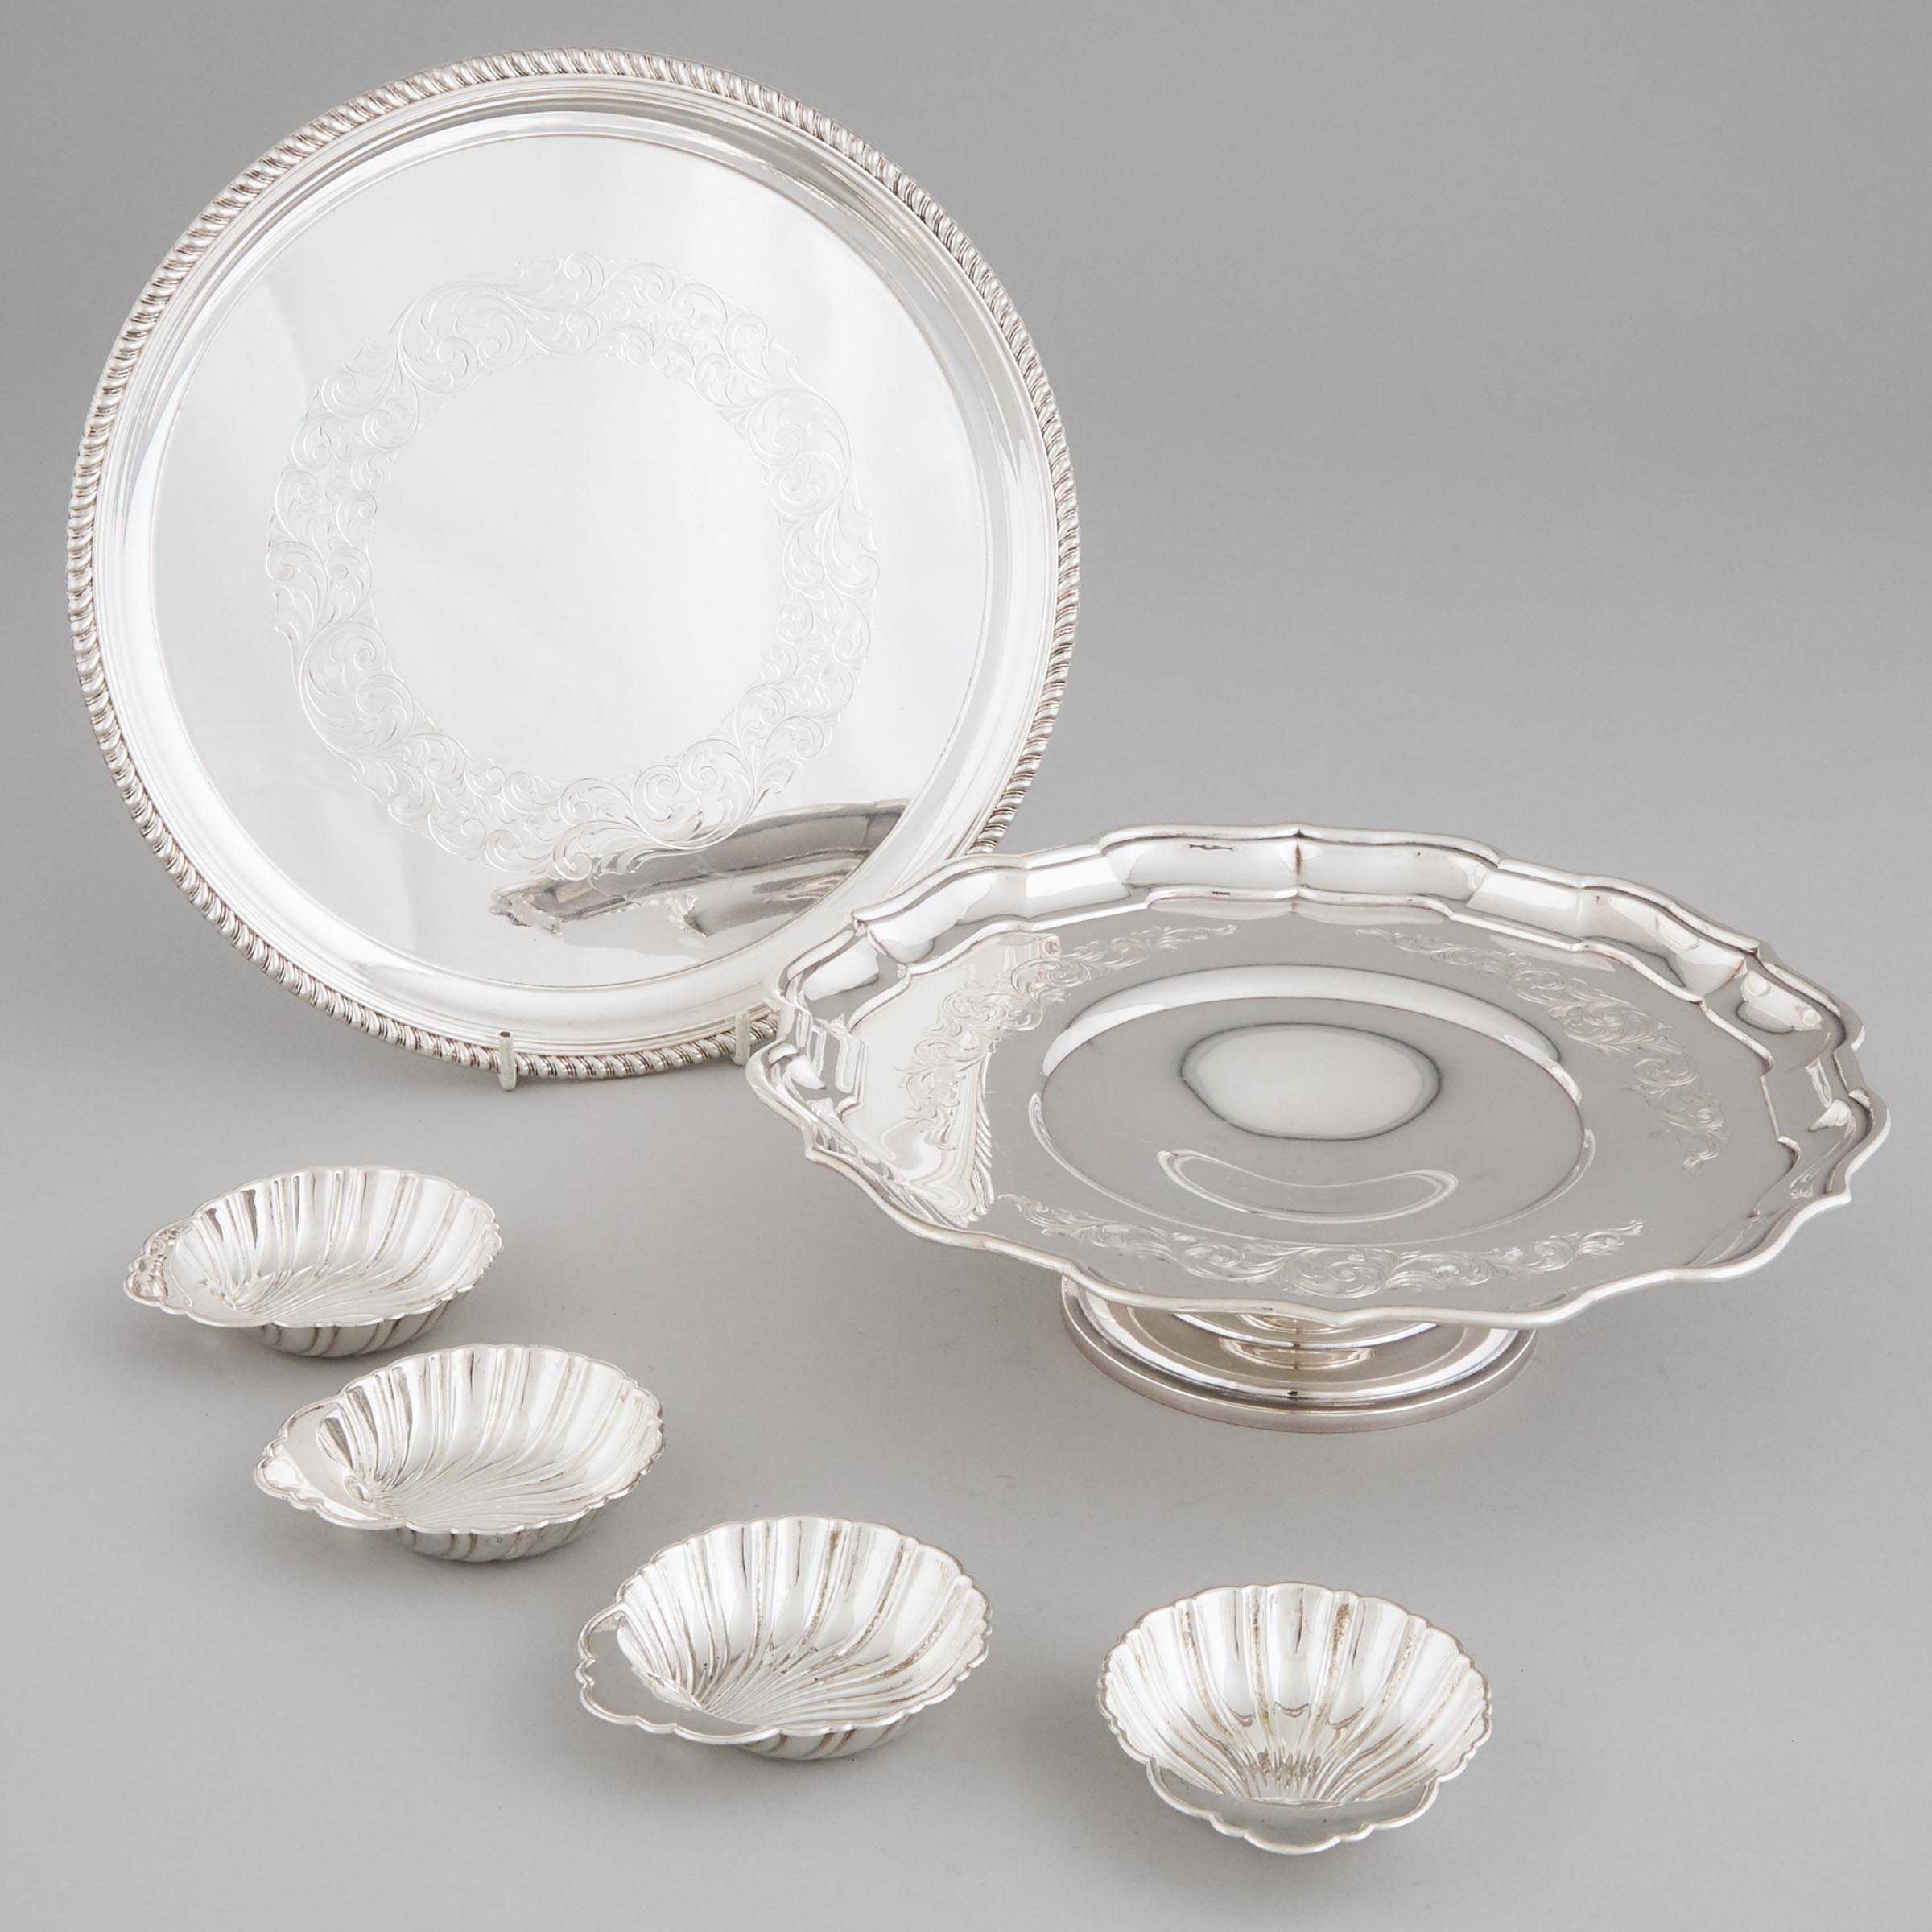 Canadian Silver Circular Waiter, Footed Comport and Four Shell Shaped Nut Dishes,  Henry Birks & Sons, Montreal, Que., 1965-69